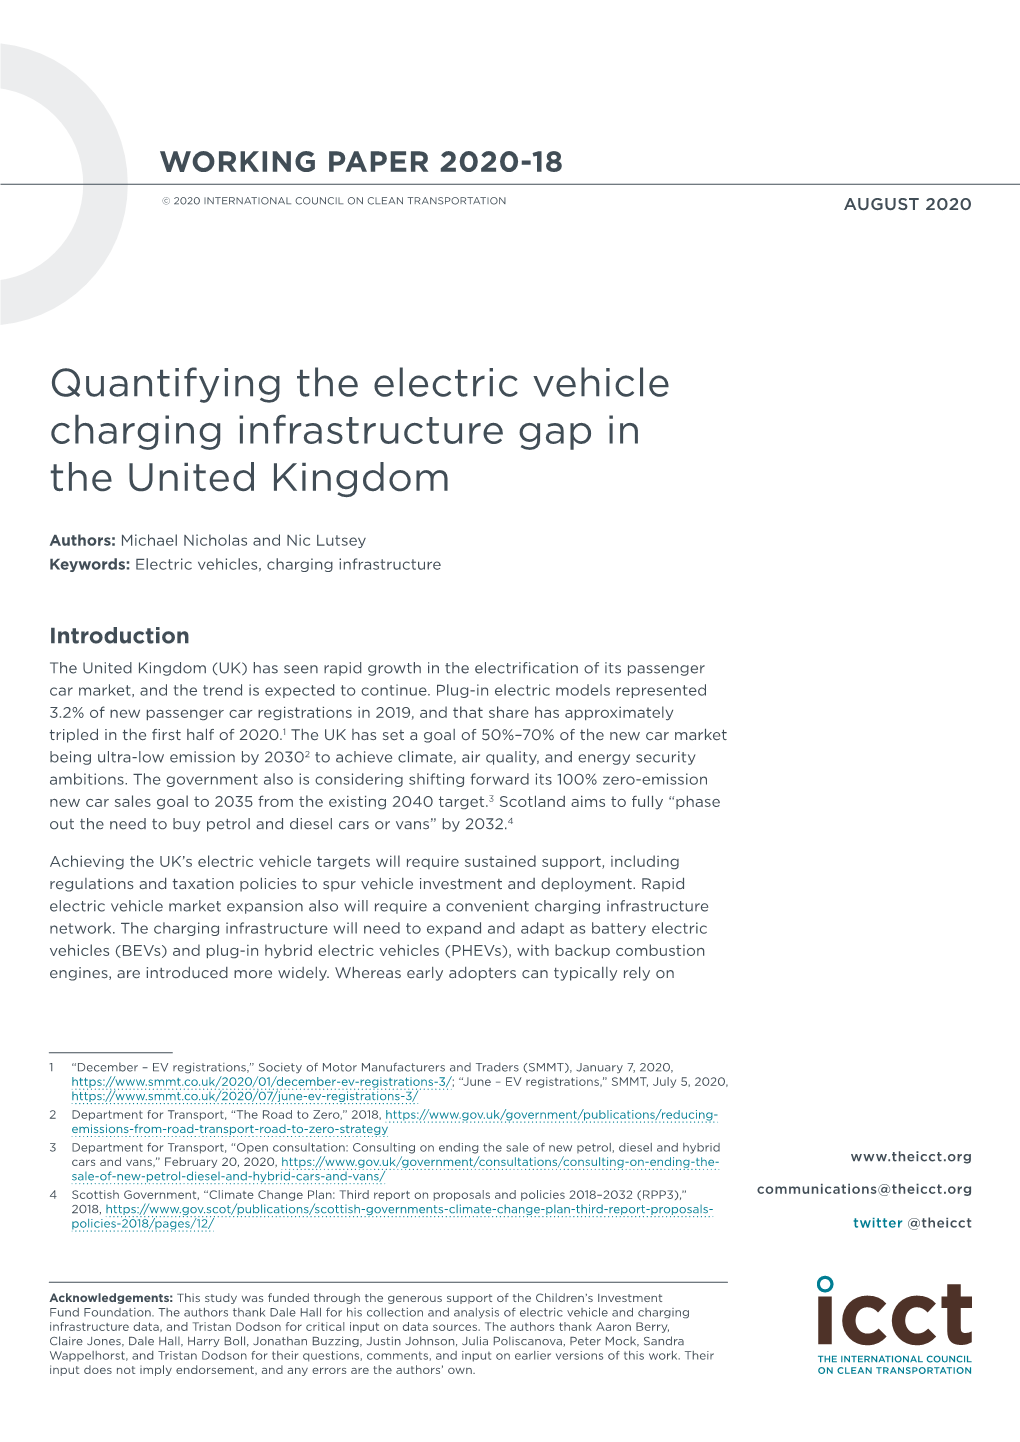 Quantifying the Electric Vehicle Charging Infrastructure Gap in the United Kingdom